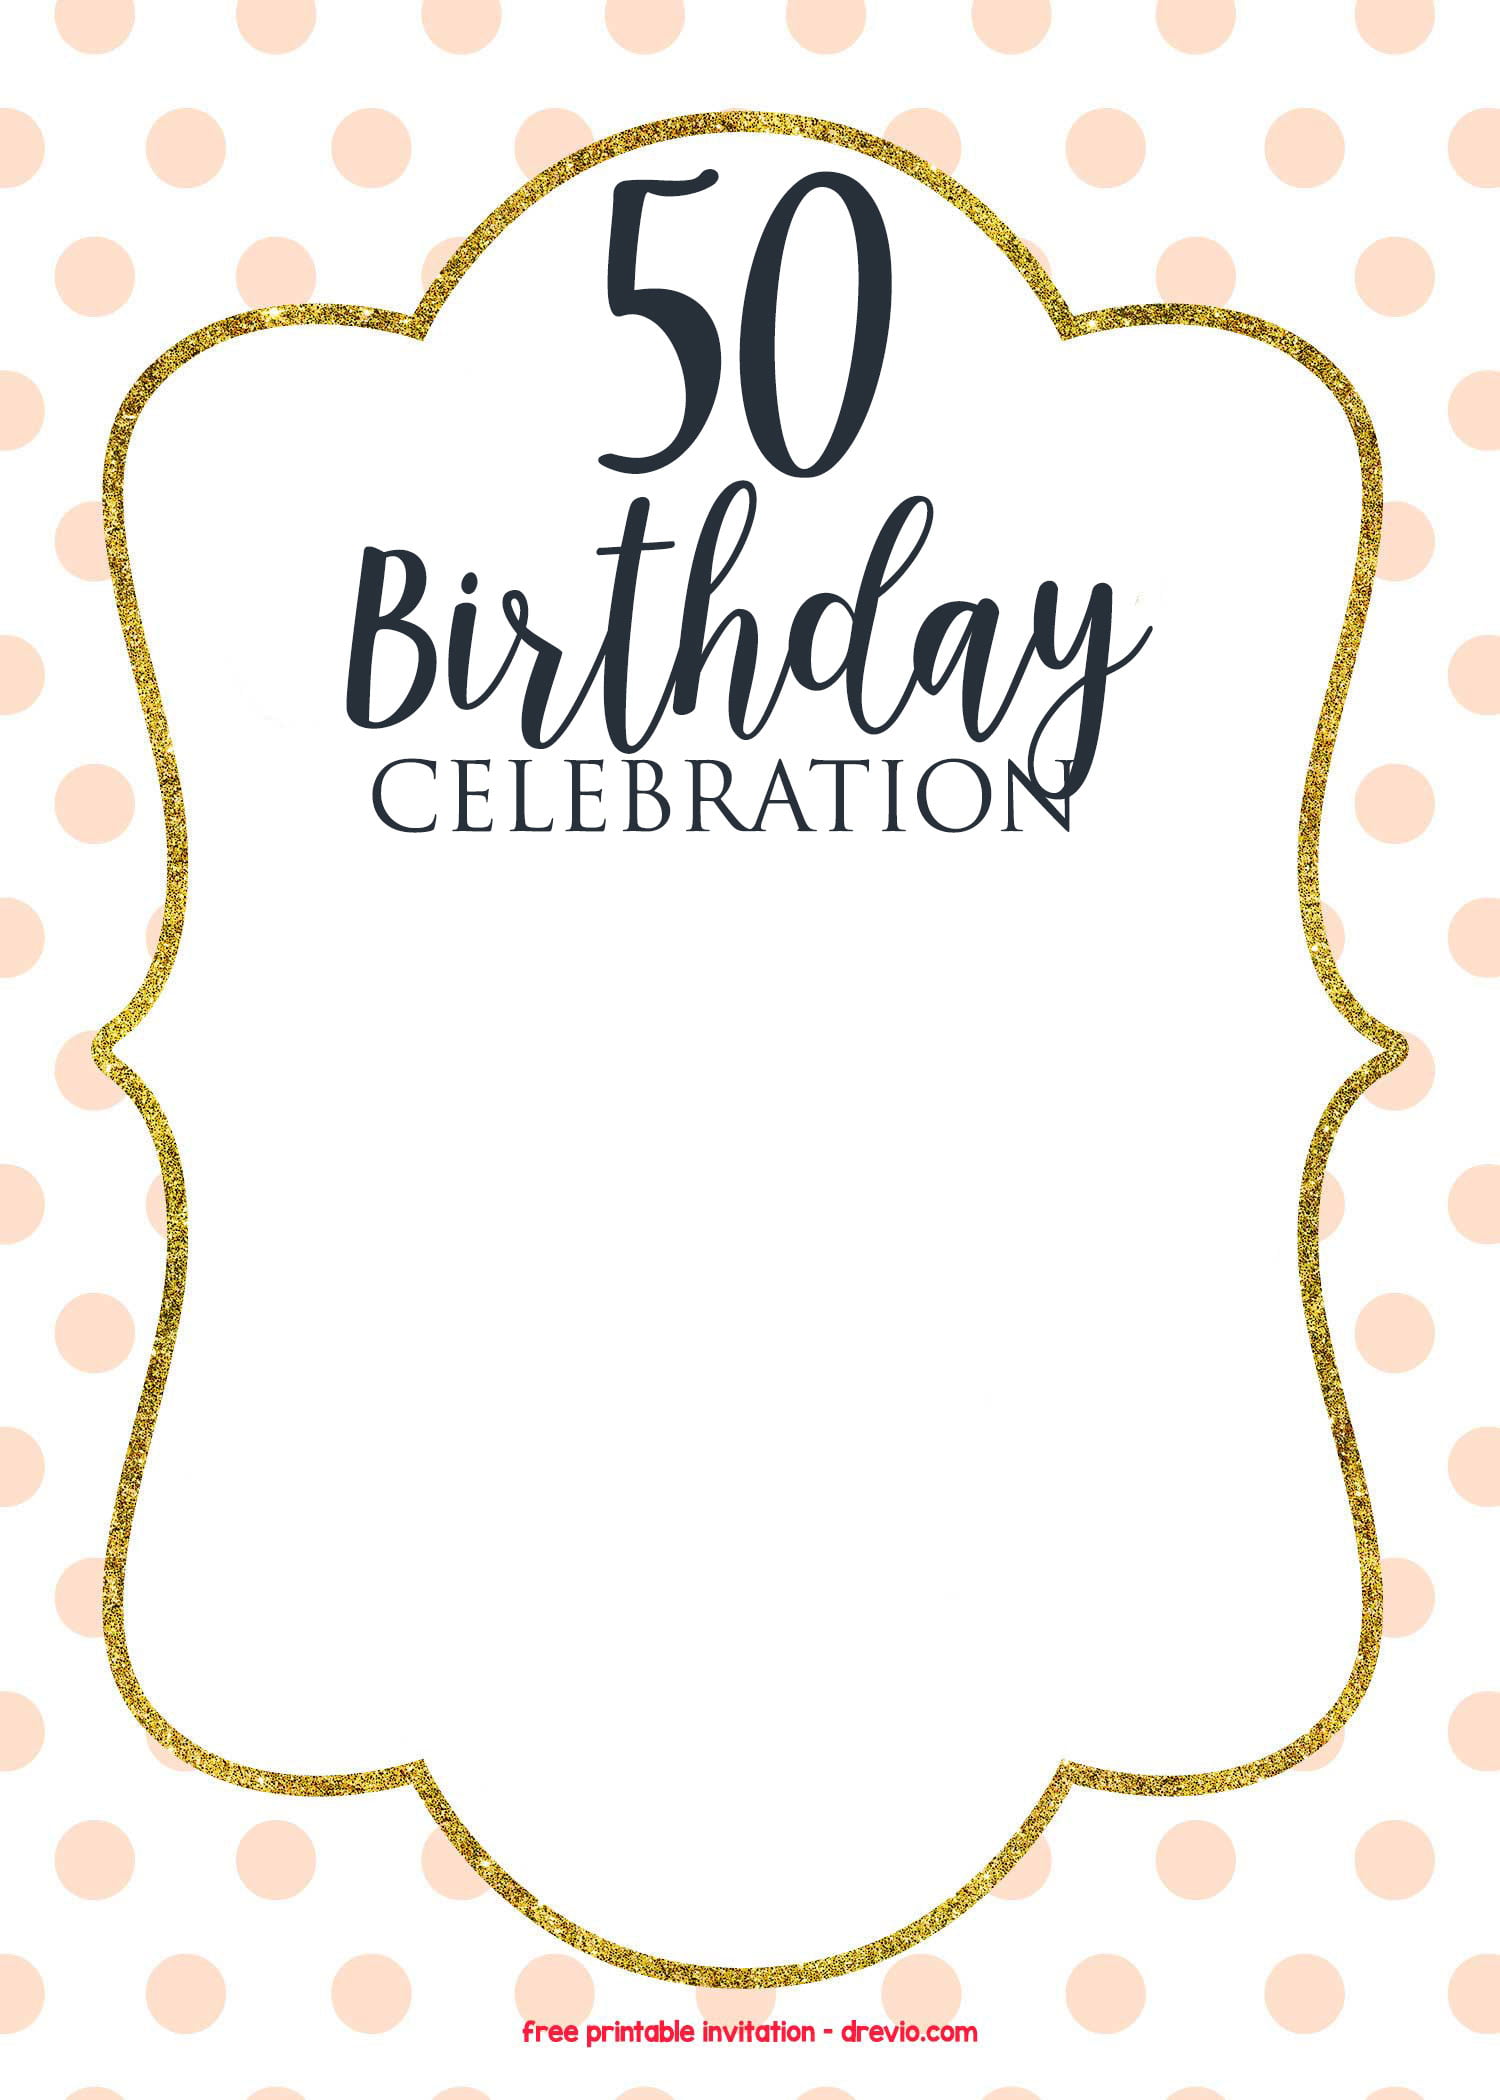 50th-birthday-invitation-template-editable-blue-and-white-etsy